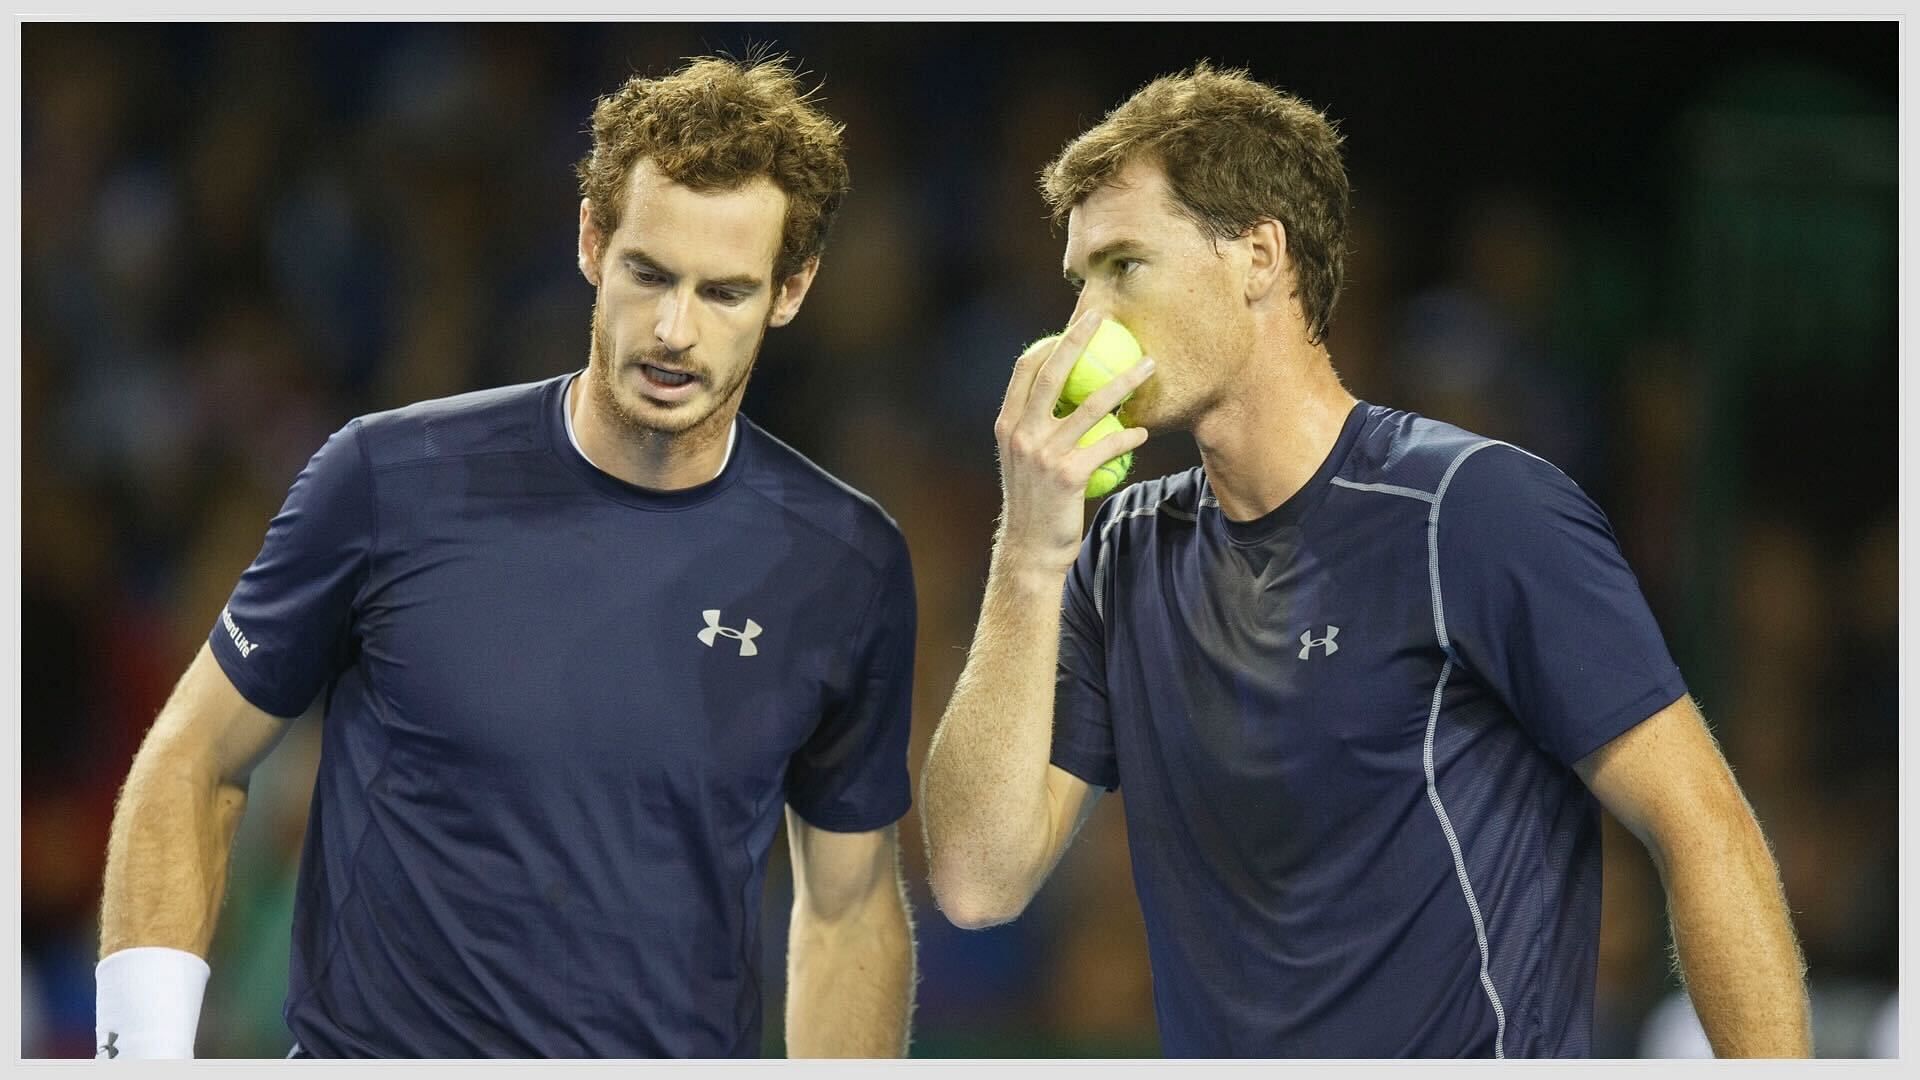 Andy Murray(left) and his brother Jamie Murray(right)